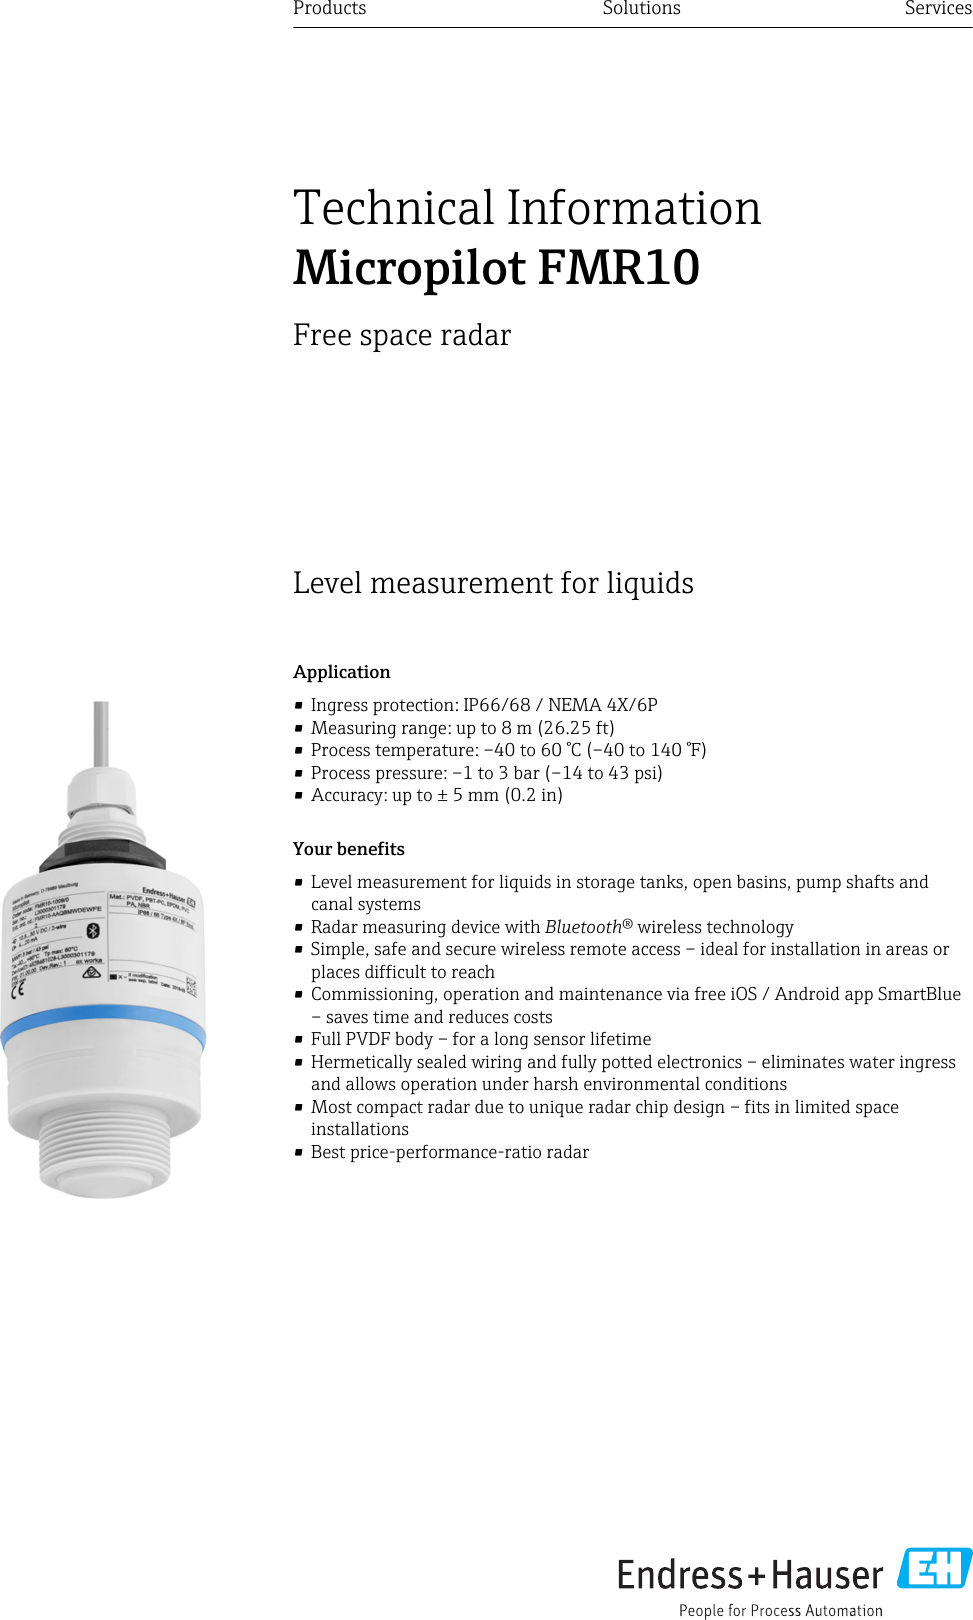 Level measurement for liquidsApplication• Ingress protection: IP66/68 / NEMA 4X/6P• Measuring range: up to 8 m (26.25 ft)• Process temperature: –40 to 60 °C (–40 to 140 °F)• Process pressure: –1 to 3 bar (–14 to 43 psi)• Accuracy: up to ± 5 mm (0.2 in)Your benefits• Level measurement for liquids in storage tanks, open basins, pump shafts andcanal systems• Radar measuring device with Bluetooth® wireless technology• Simple, safe and secure wireless remote access – ideal for installation in areas orplaces difficult to reach• Commissioning, operation and maintenance via free iOS / Android app SmartBlue– saves time and reduces costs• Full PVDF body – for a long sensor lifetime• Hermetically sealed wiring and fully potted electronics – eliminates water ingressand allows operation under harsh environmental conditions• Most compact radar due to unique radar chip design – fits in limited spaceinstallations• Best price-performance-ratio radarProducts Solutions ServicesTechnical InformationMicropilot FMR10Free space radar